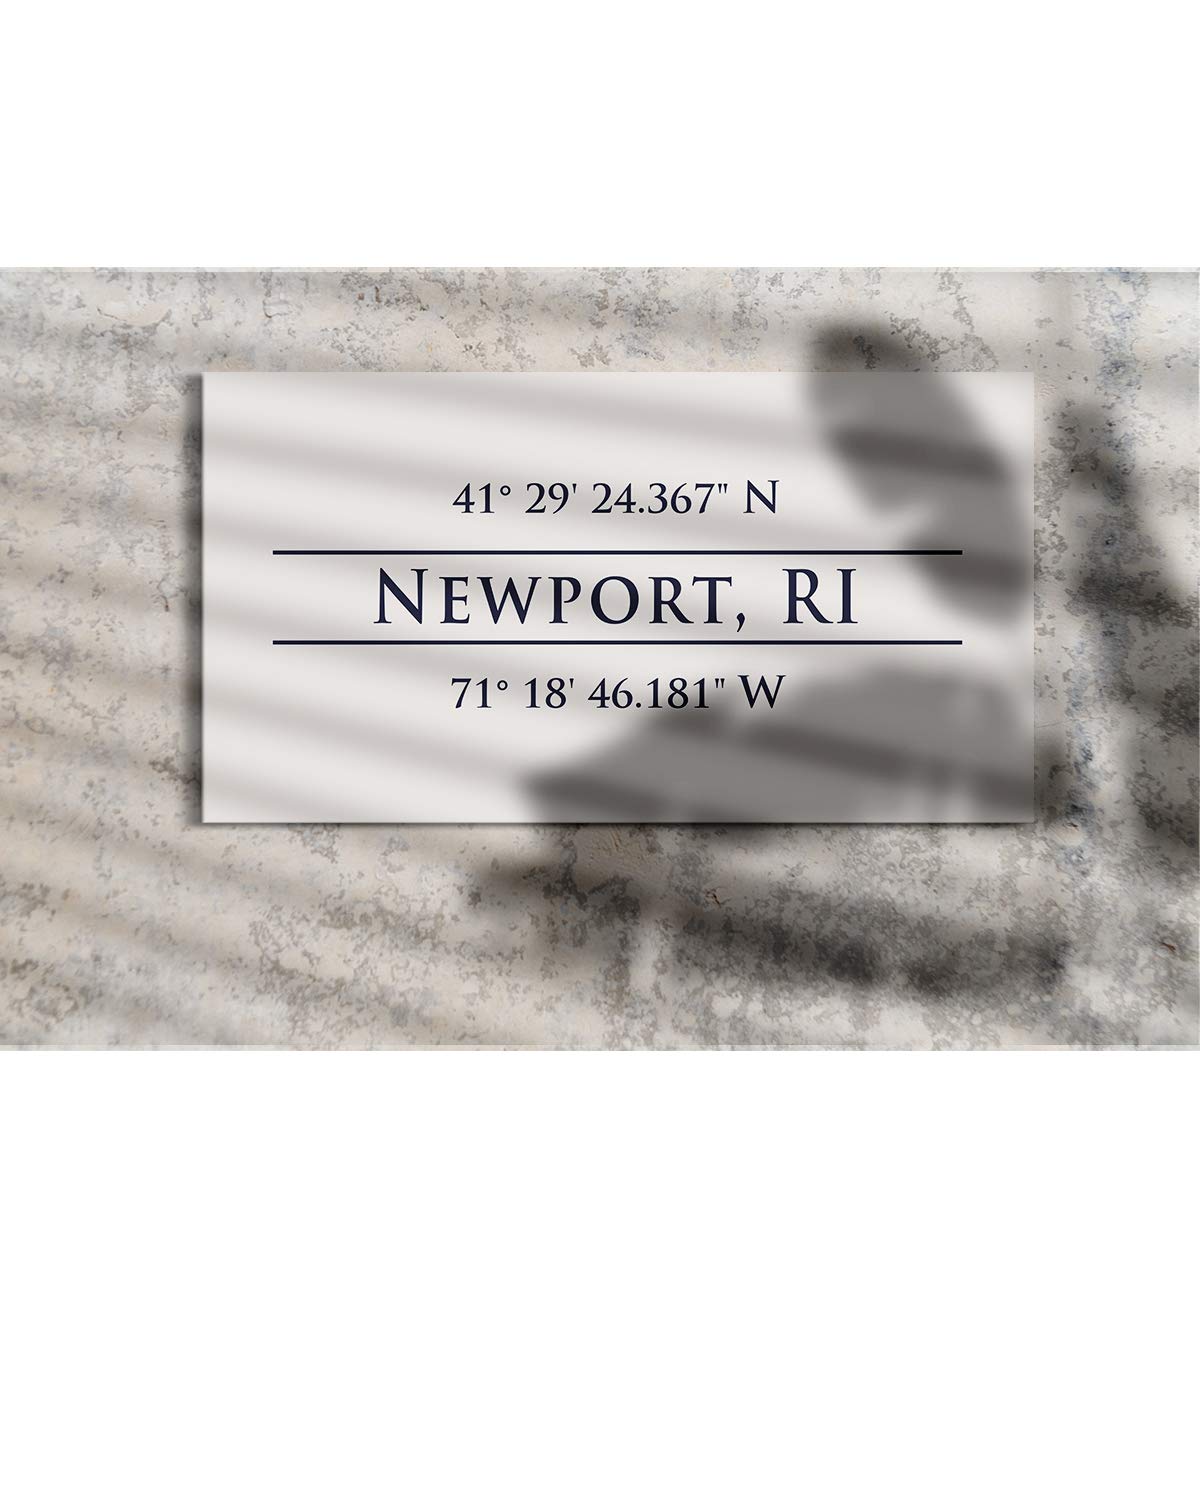 Newport, RI 41° 29' 24.367" N, 71° 18' 46.181" W - Wall Decor Art Canvas with an offwhite background - Ready to Hang - Great for above a couch, table, bed or more